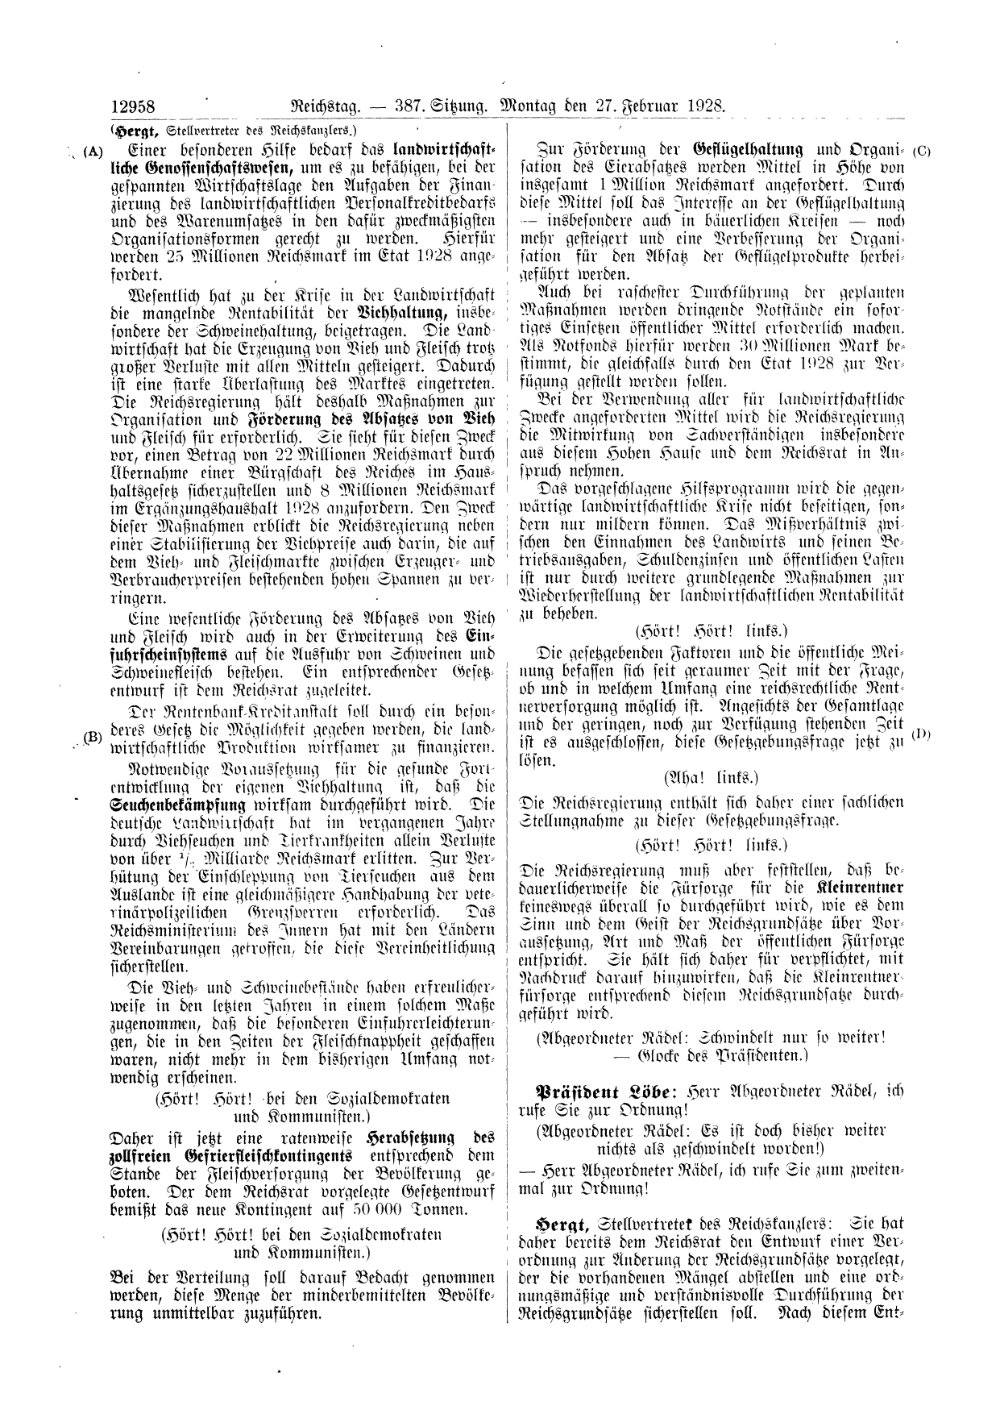 Scan of page 12958